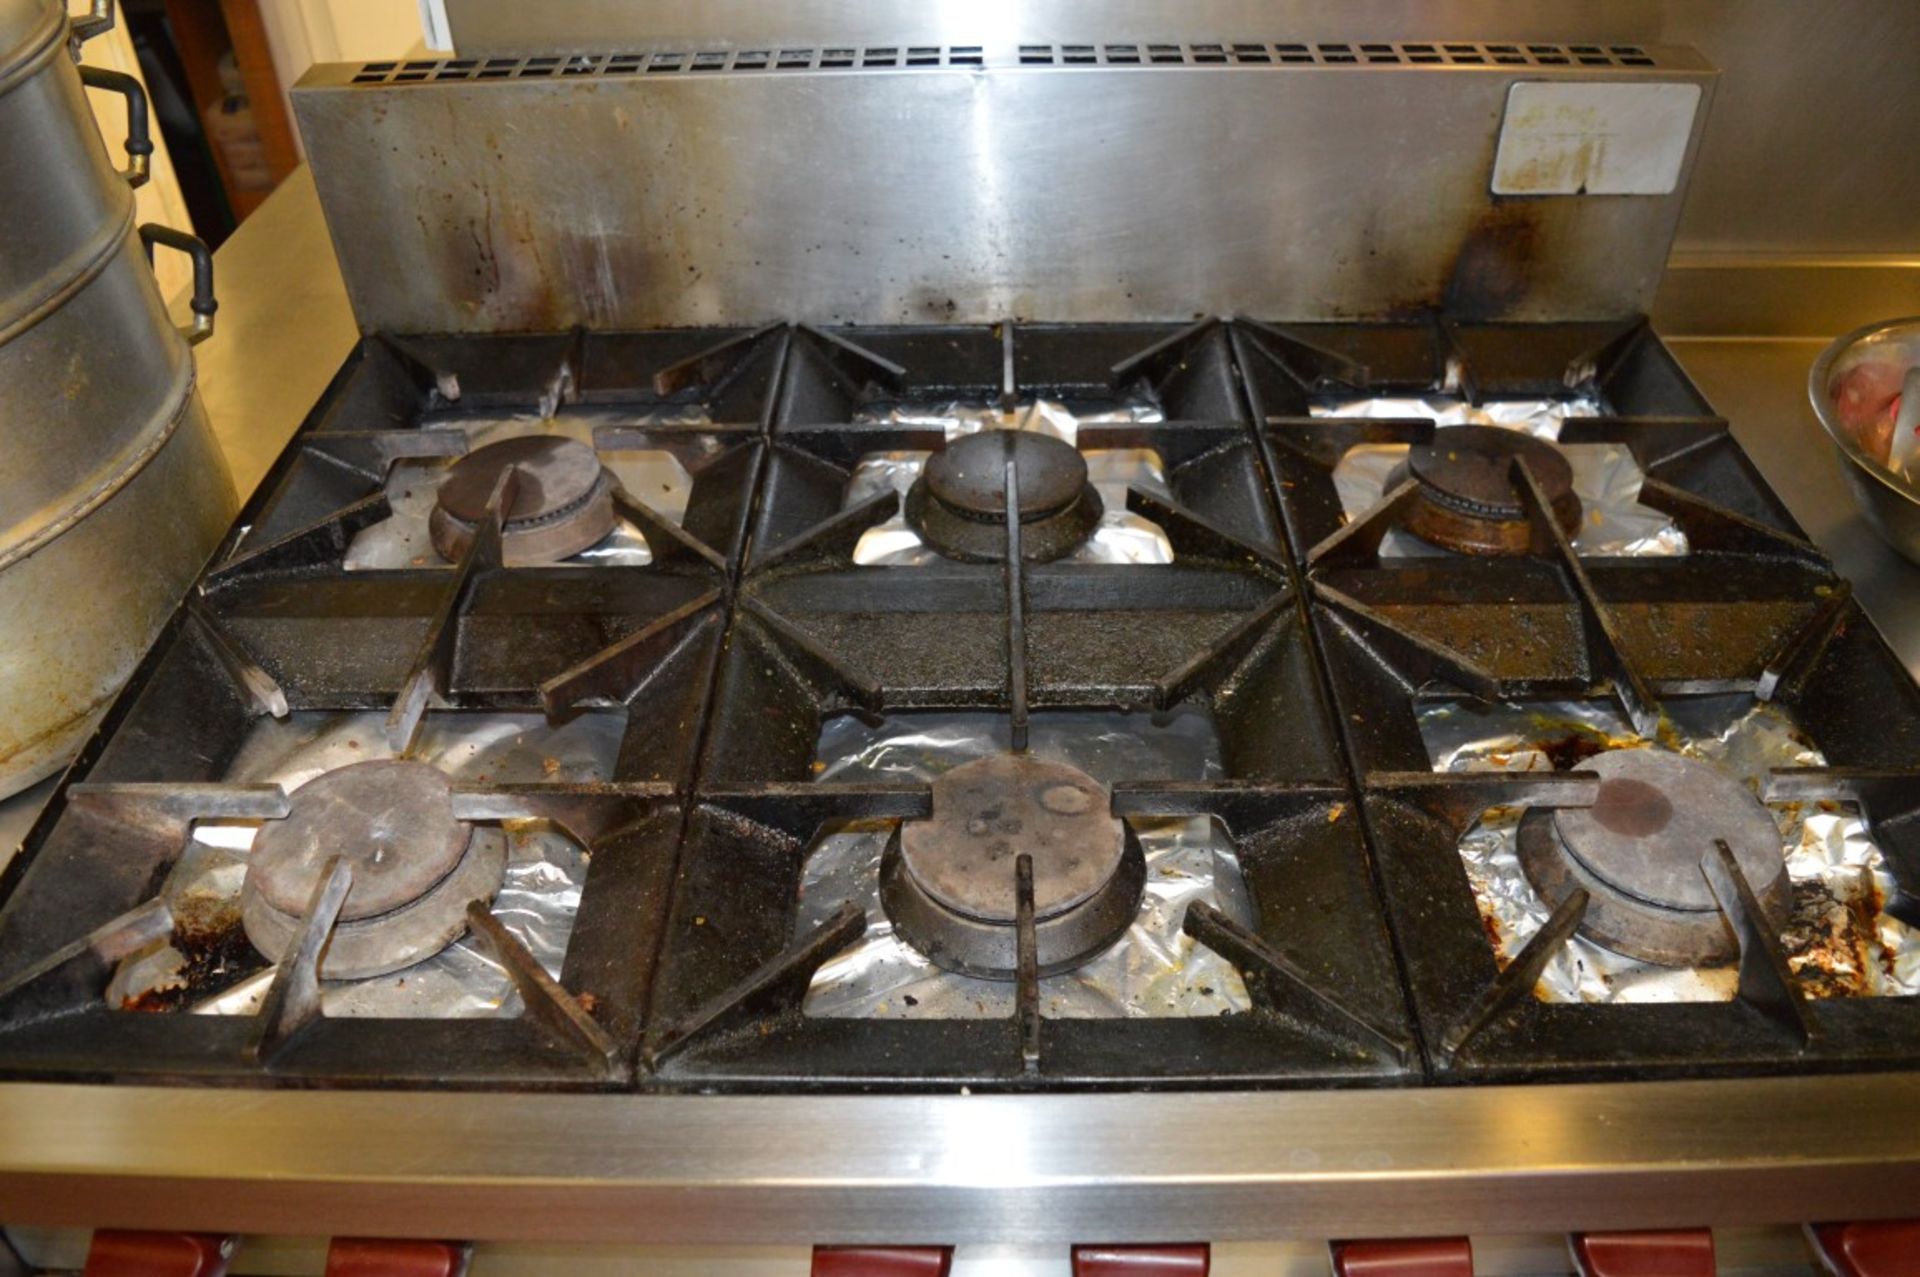 1 x Falcon 6 Burner Commercial Gas Cooker and Oven - Stainless Steel Commercial Kitchen - Image 4 of 6